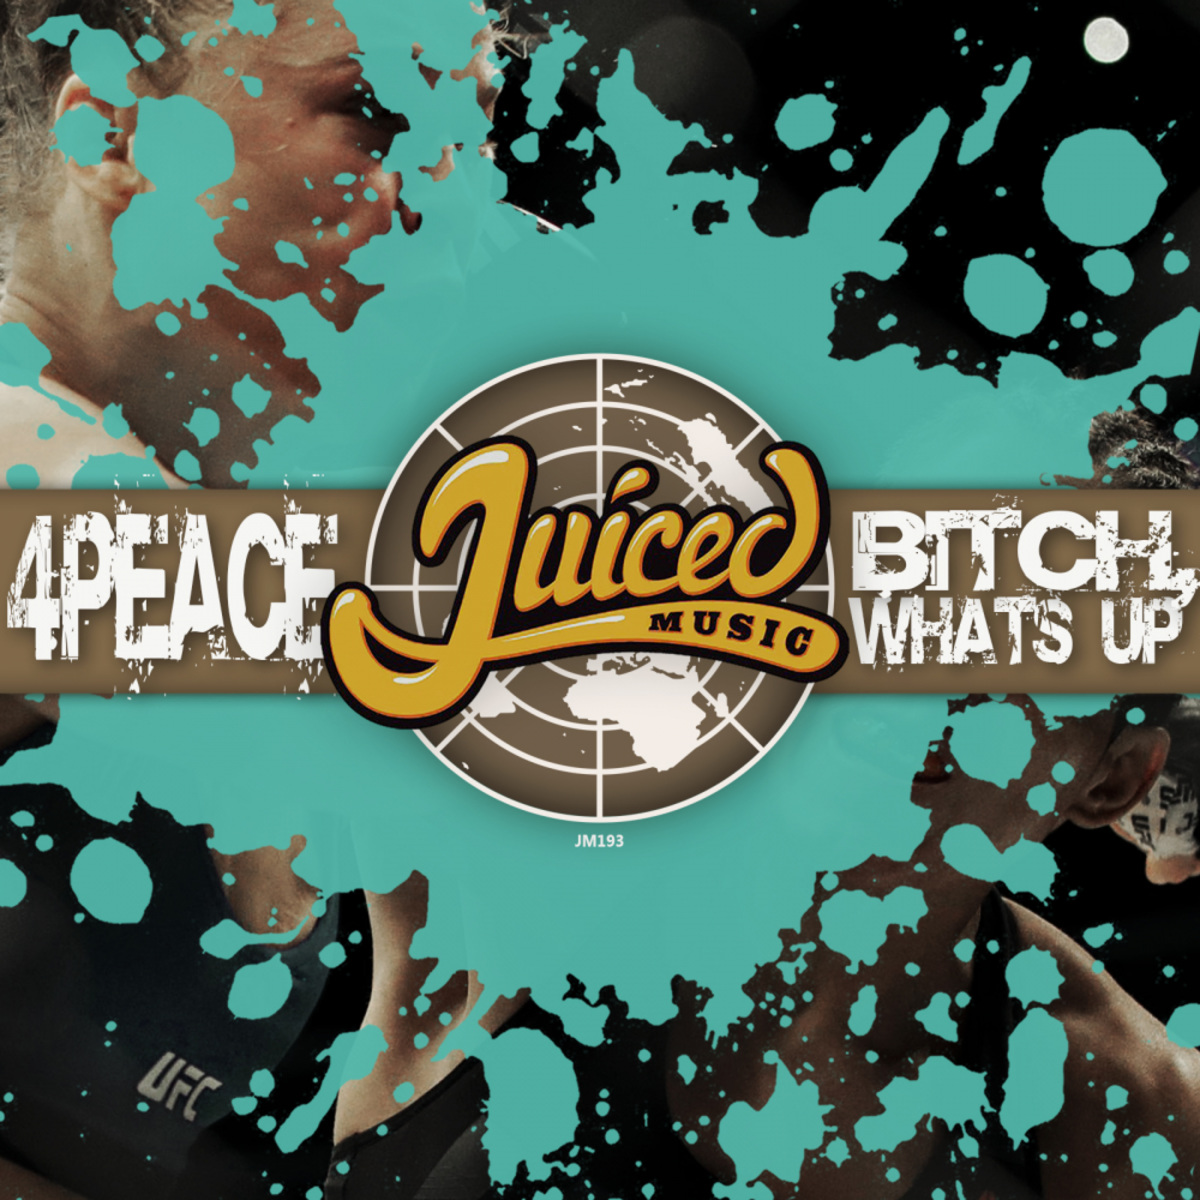 4Peace - Bitch, What's Up / Juiced Music